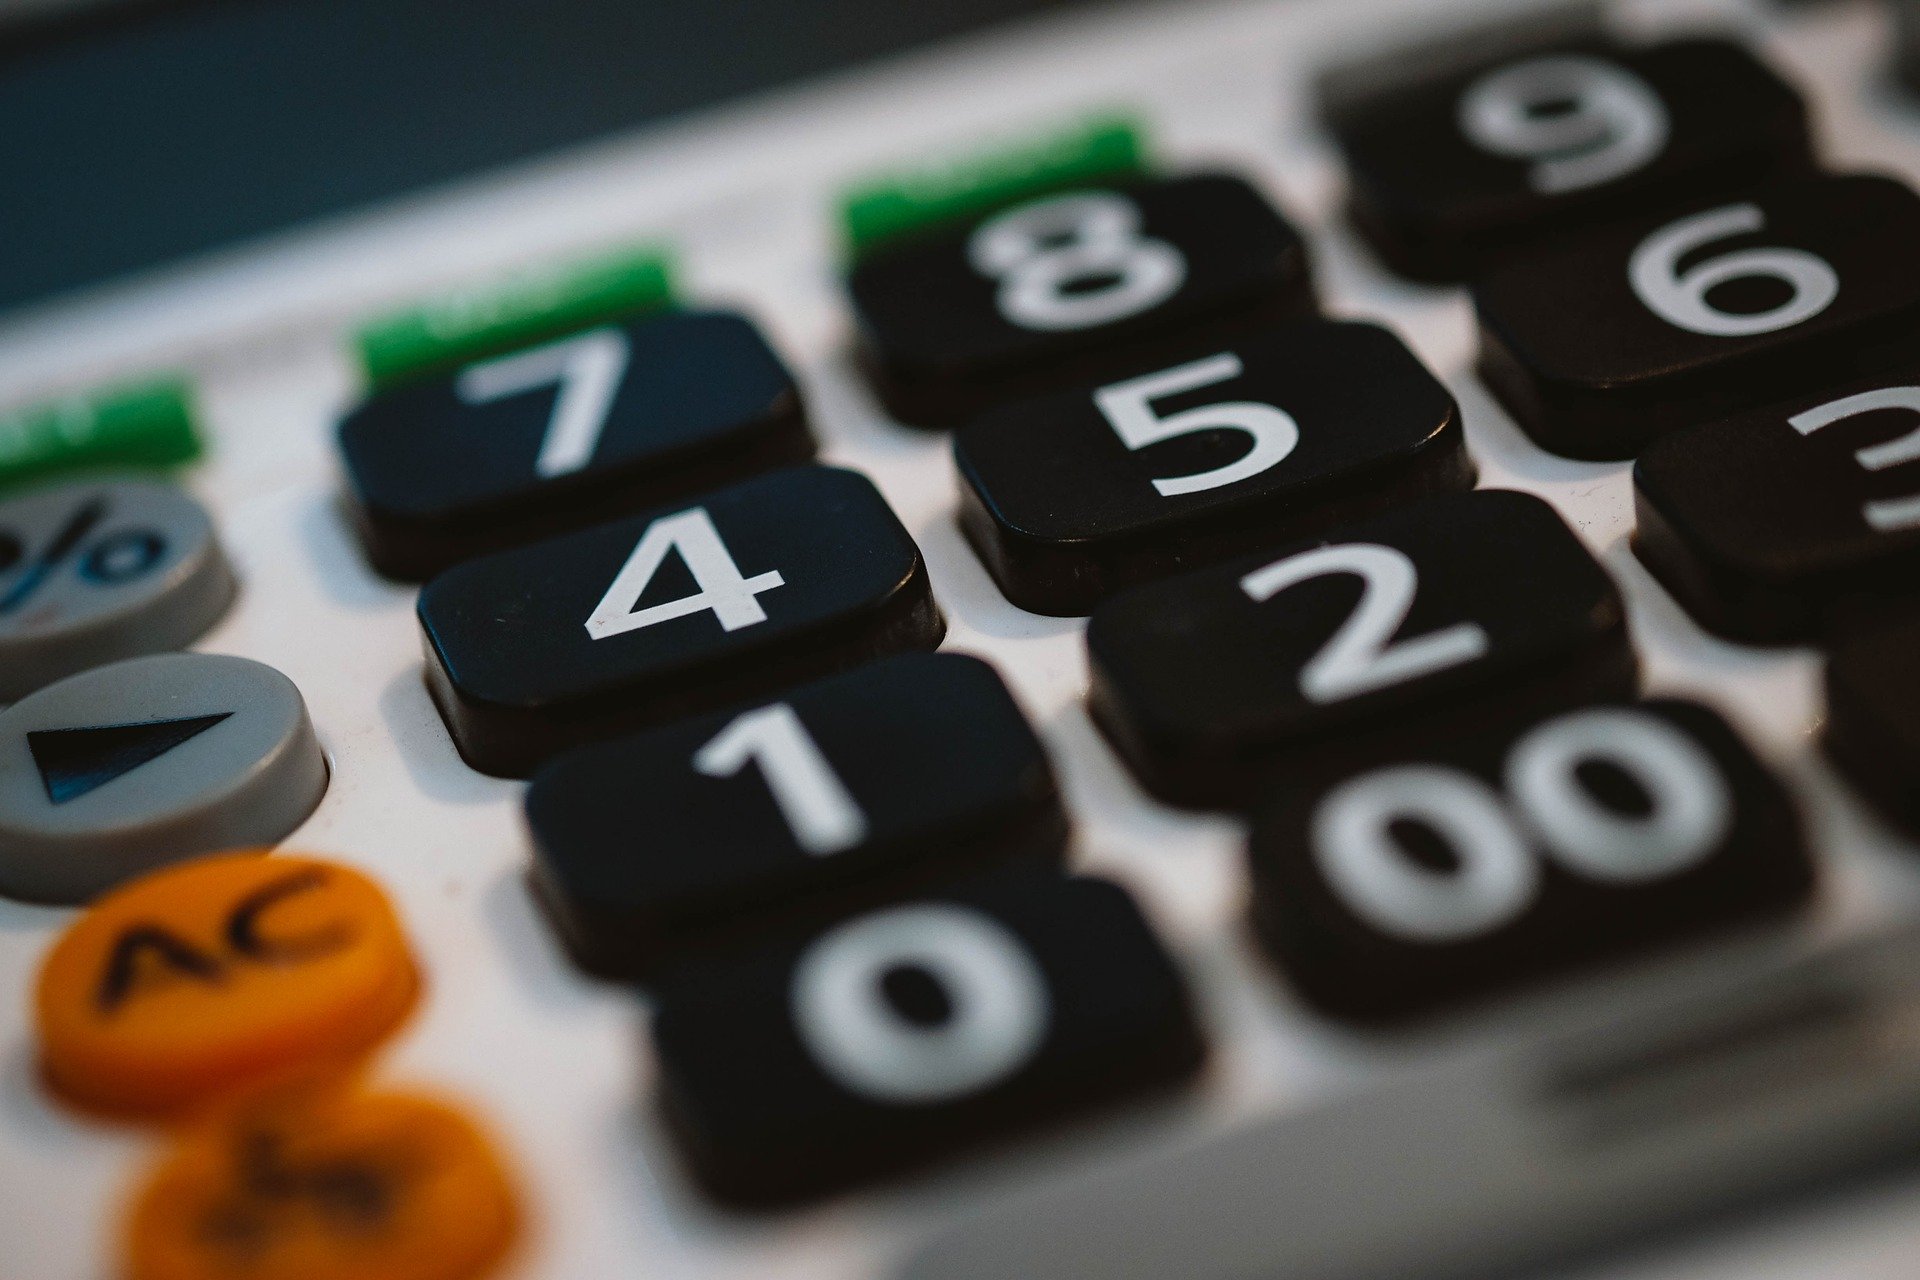 Close-up view of a calculator